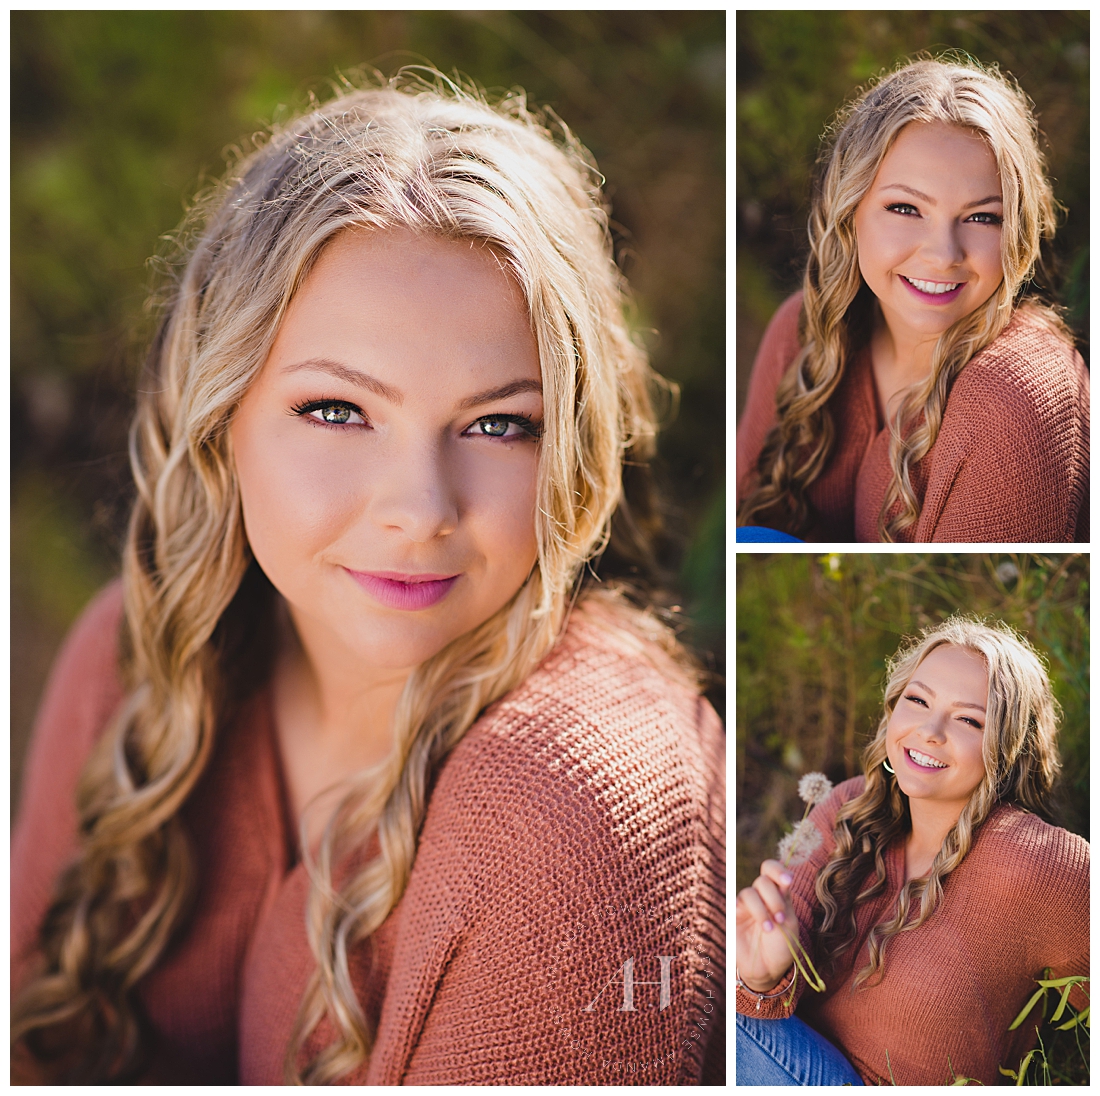 Outdoor senior portraits with natural light | How to have the best senior portraits, pose ideas for high school senior girls | Photographed by the Best Tacoma Senior Photographer Amanda Howse